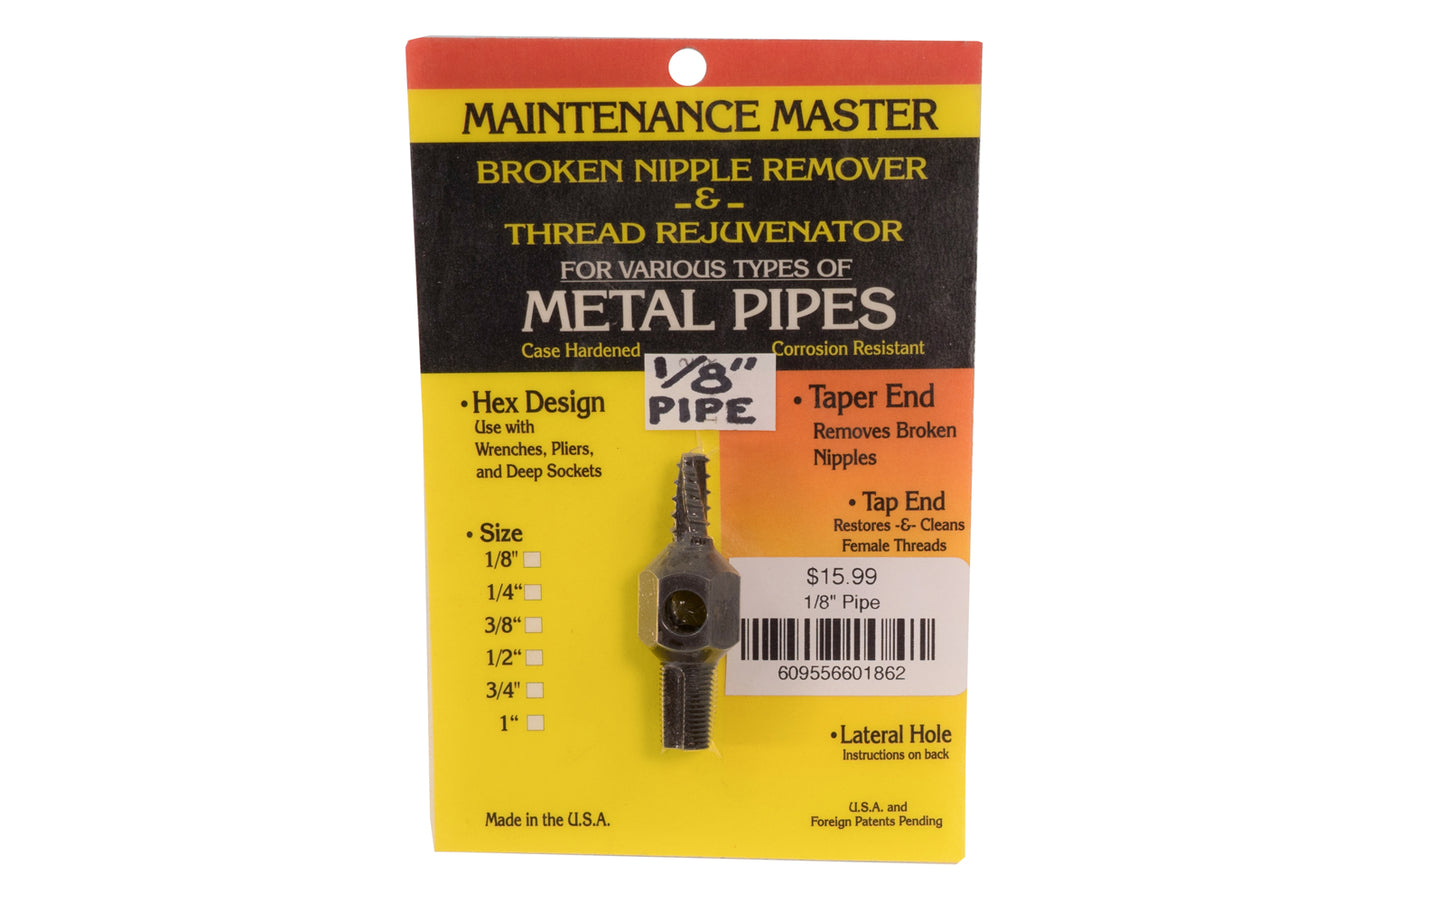 Broken Nipple Remover & Thread Rejuvenator - 1/8" Pipe. Hex design: Use with wrenches, pliers, & deep sockets. Taper End: Removes broken nipples. Tap End:  Restores & cleans female threads.   Made in USA.